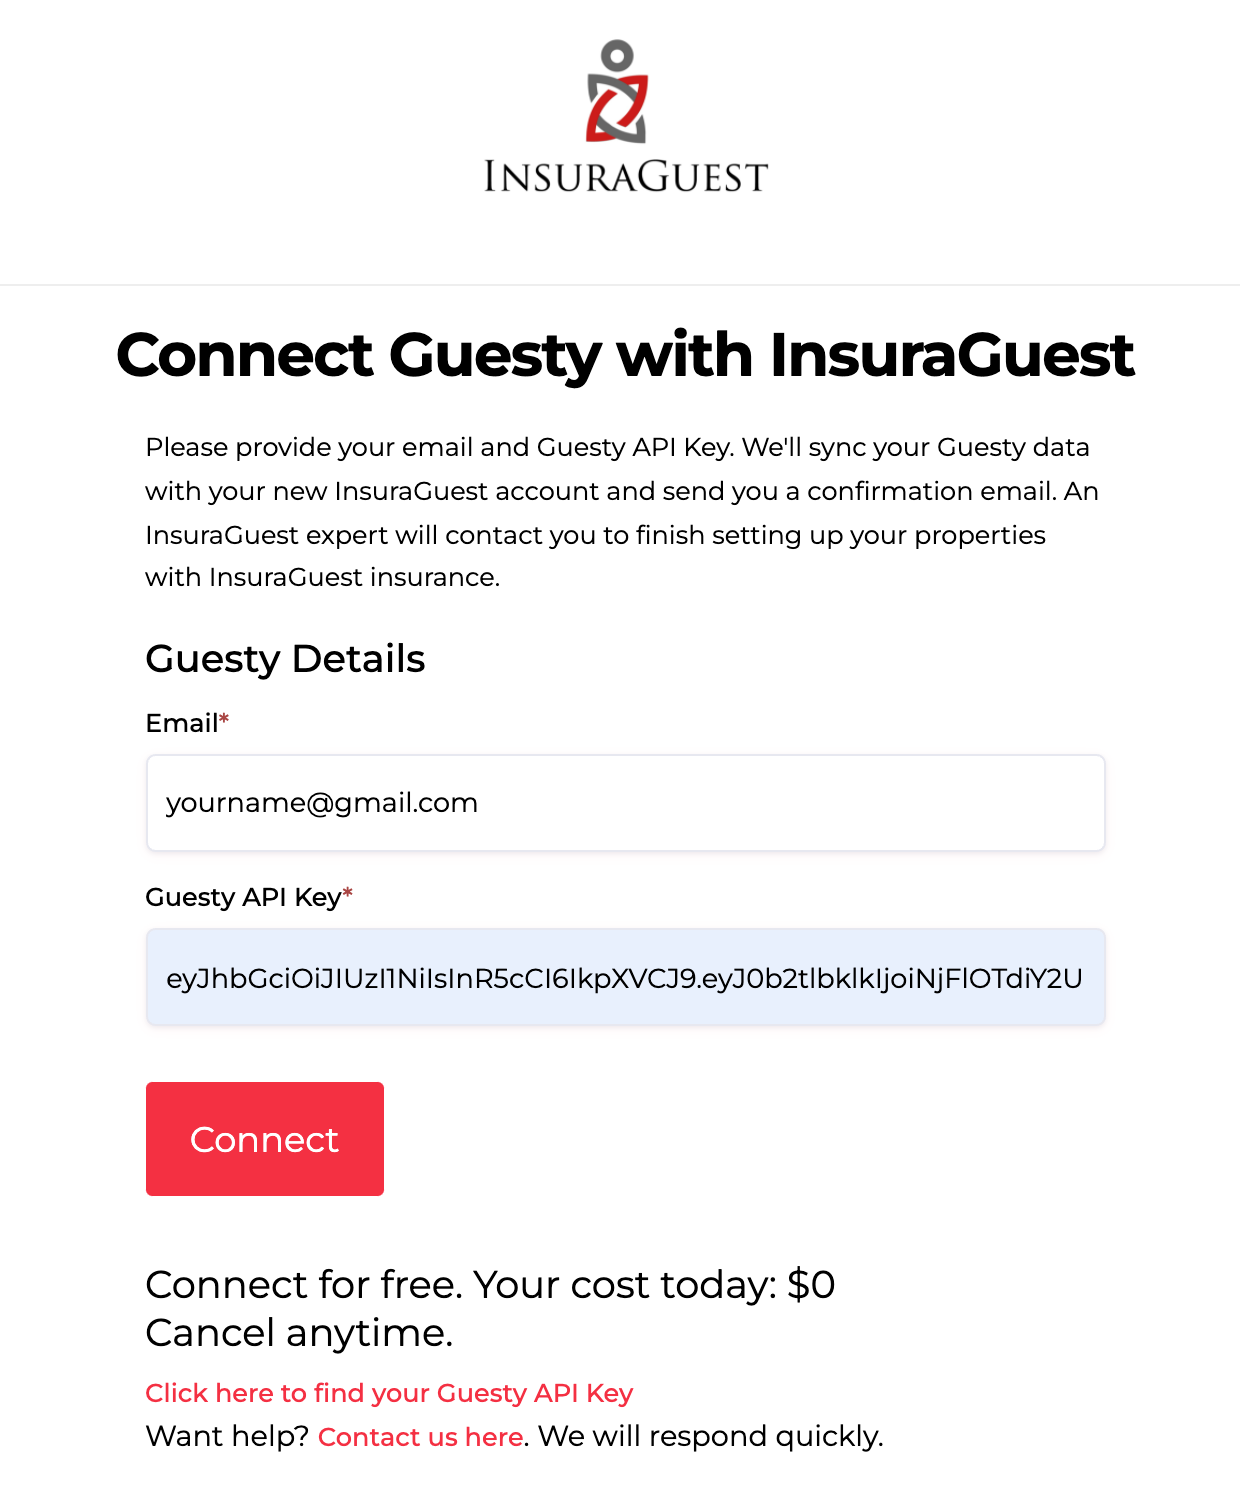 insuraguest-guesty-connection